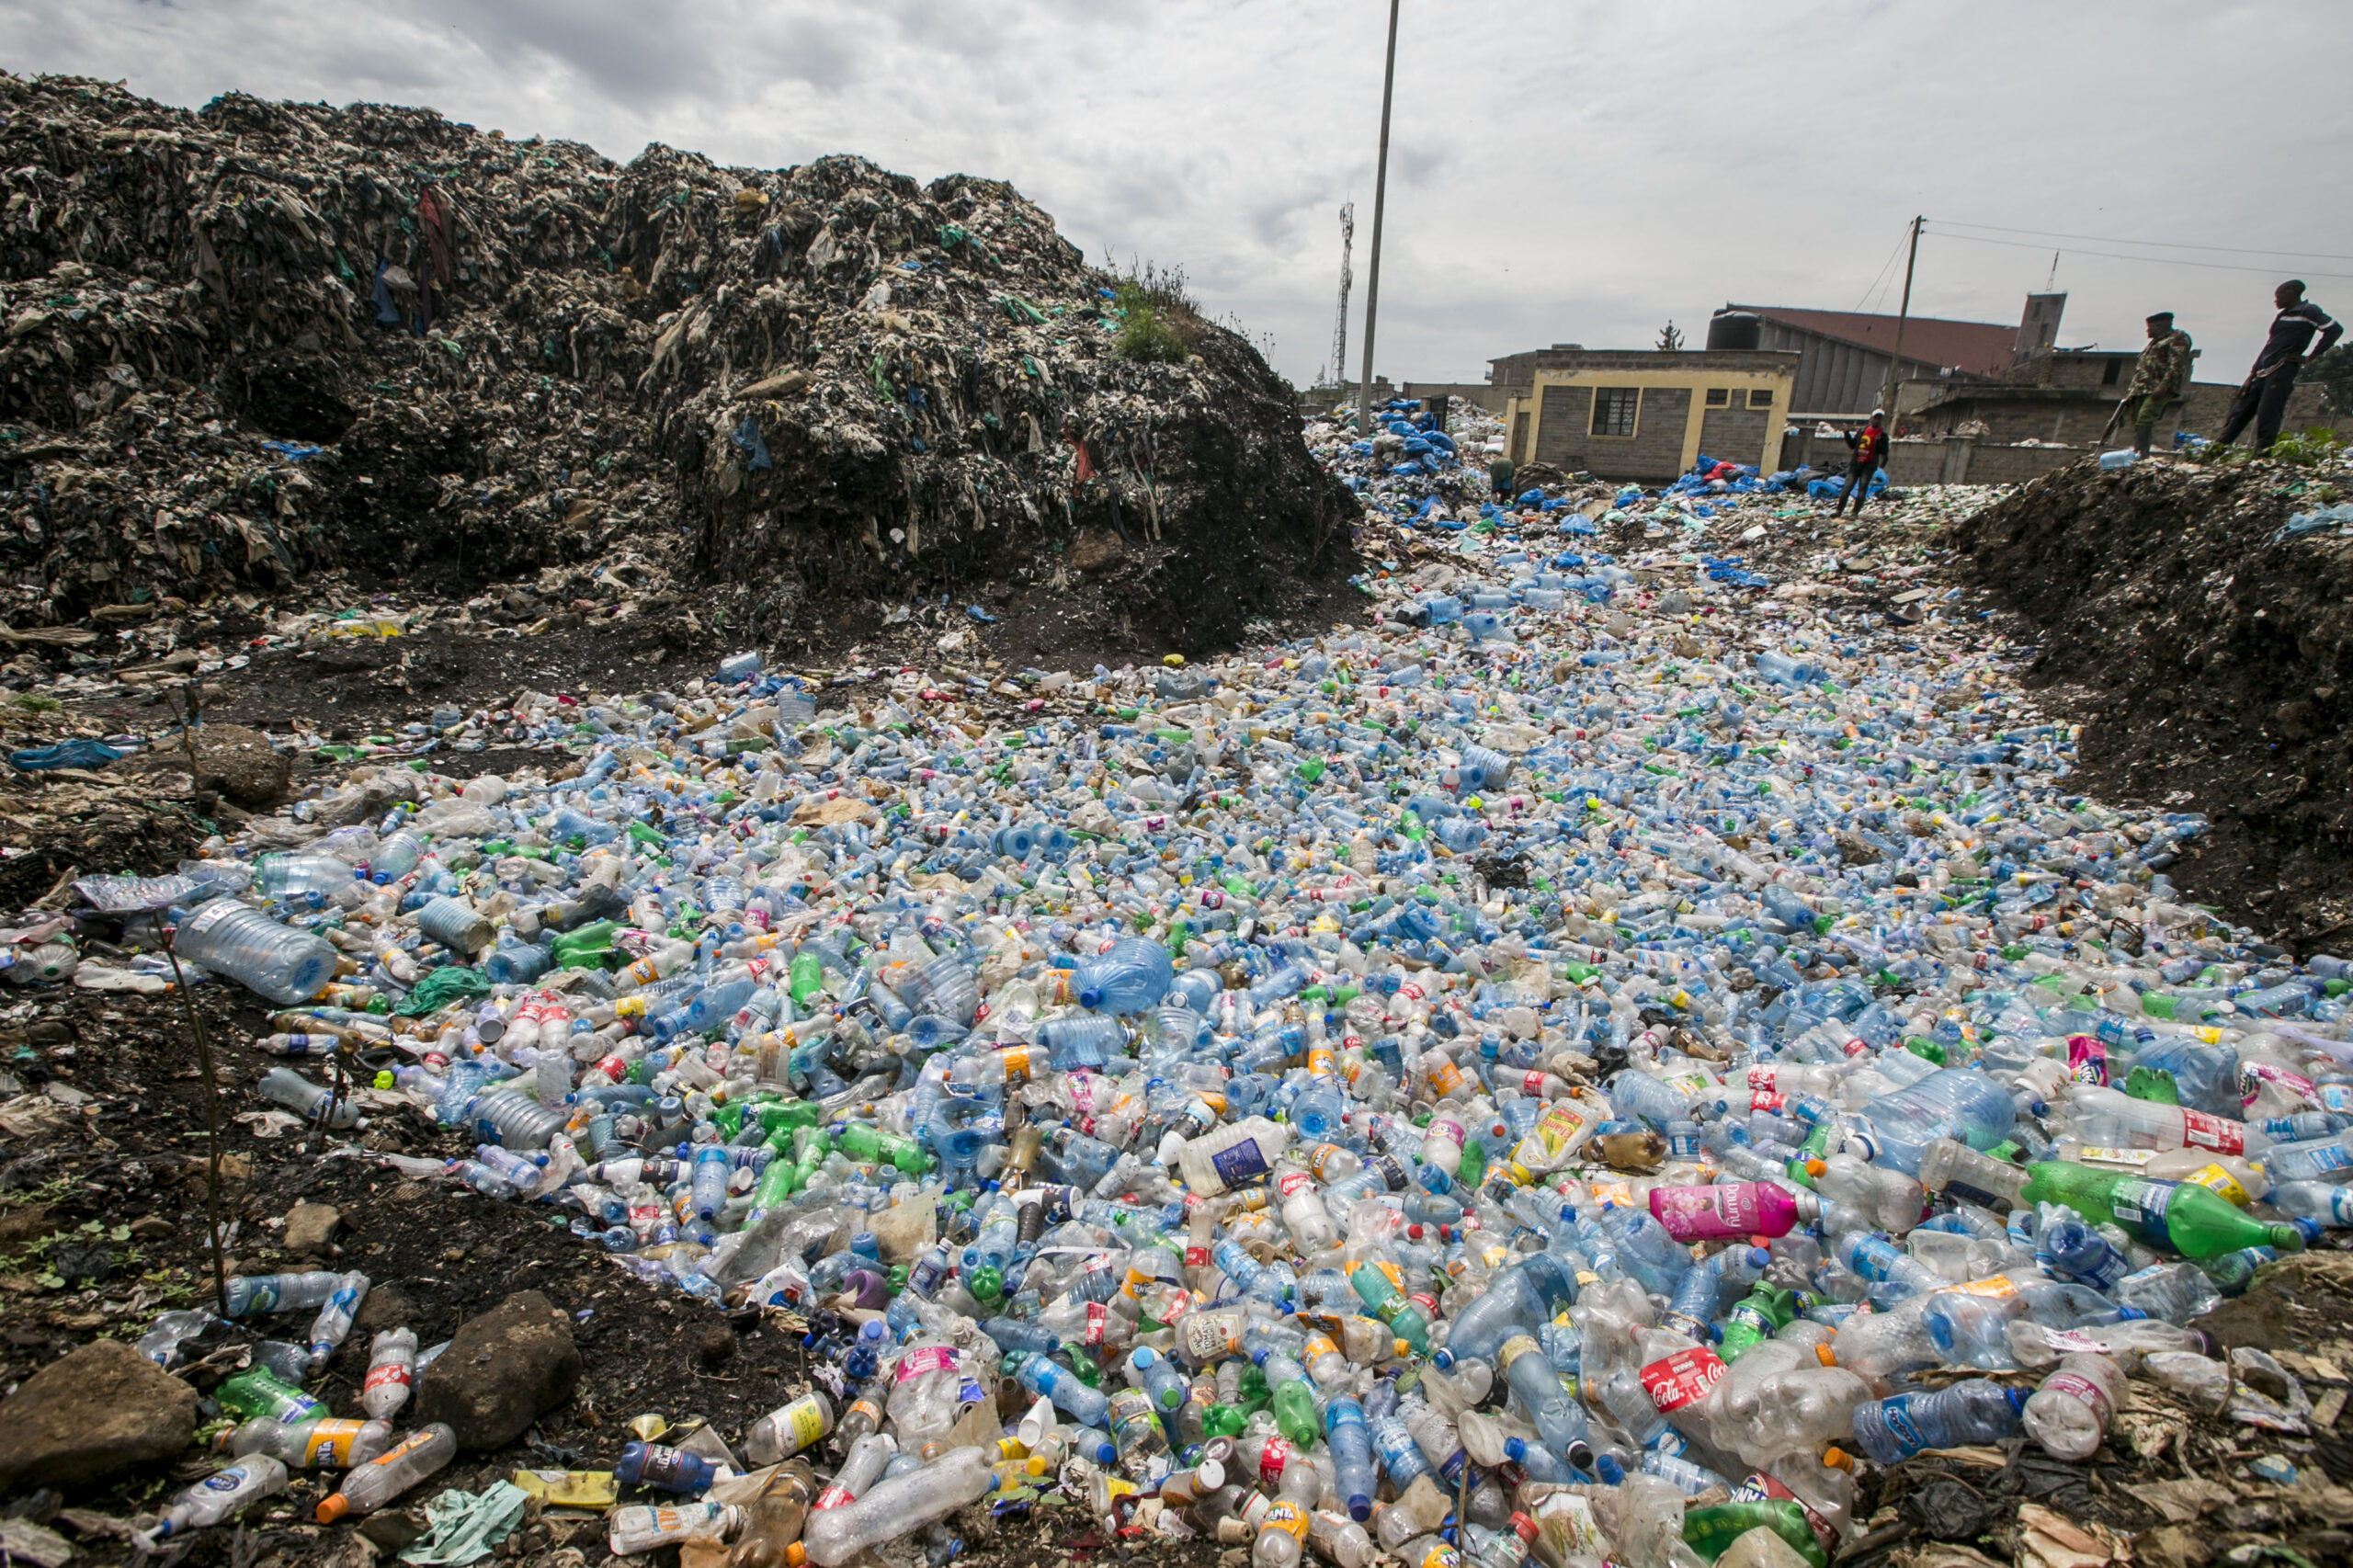 Oil-backed trade group is lobbying the Trump administration to push  plastics across Africa - Unearthed